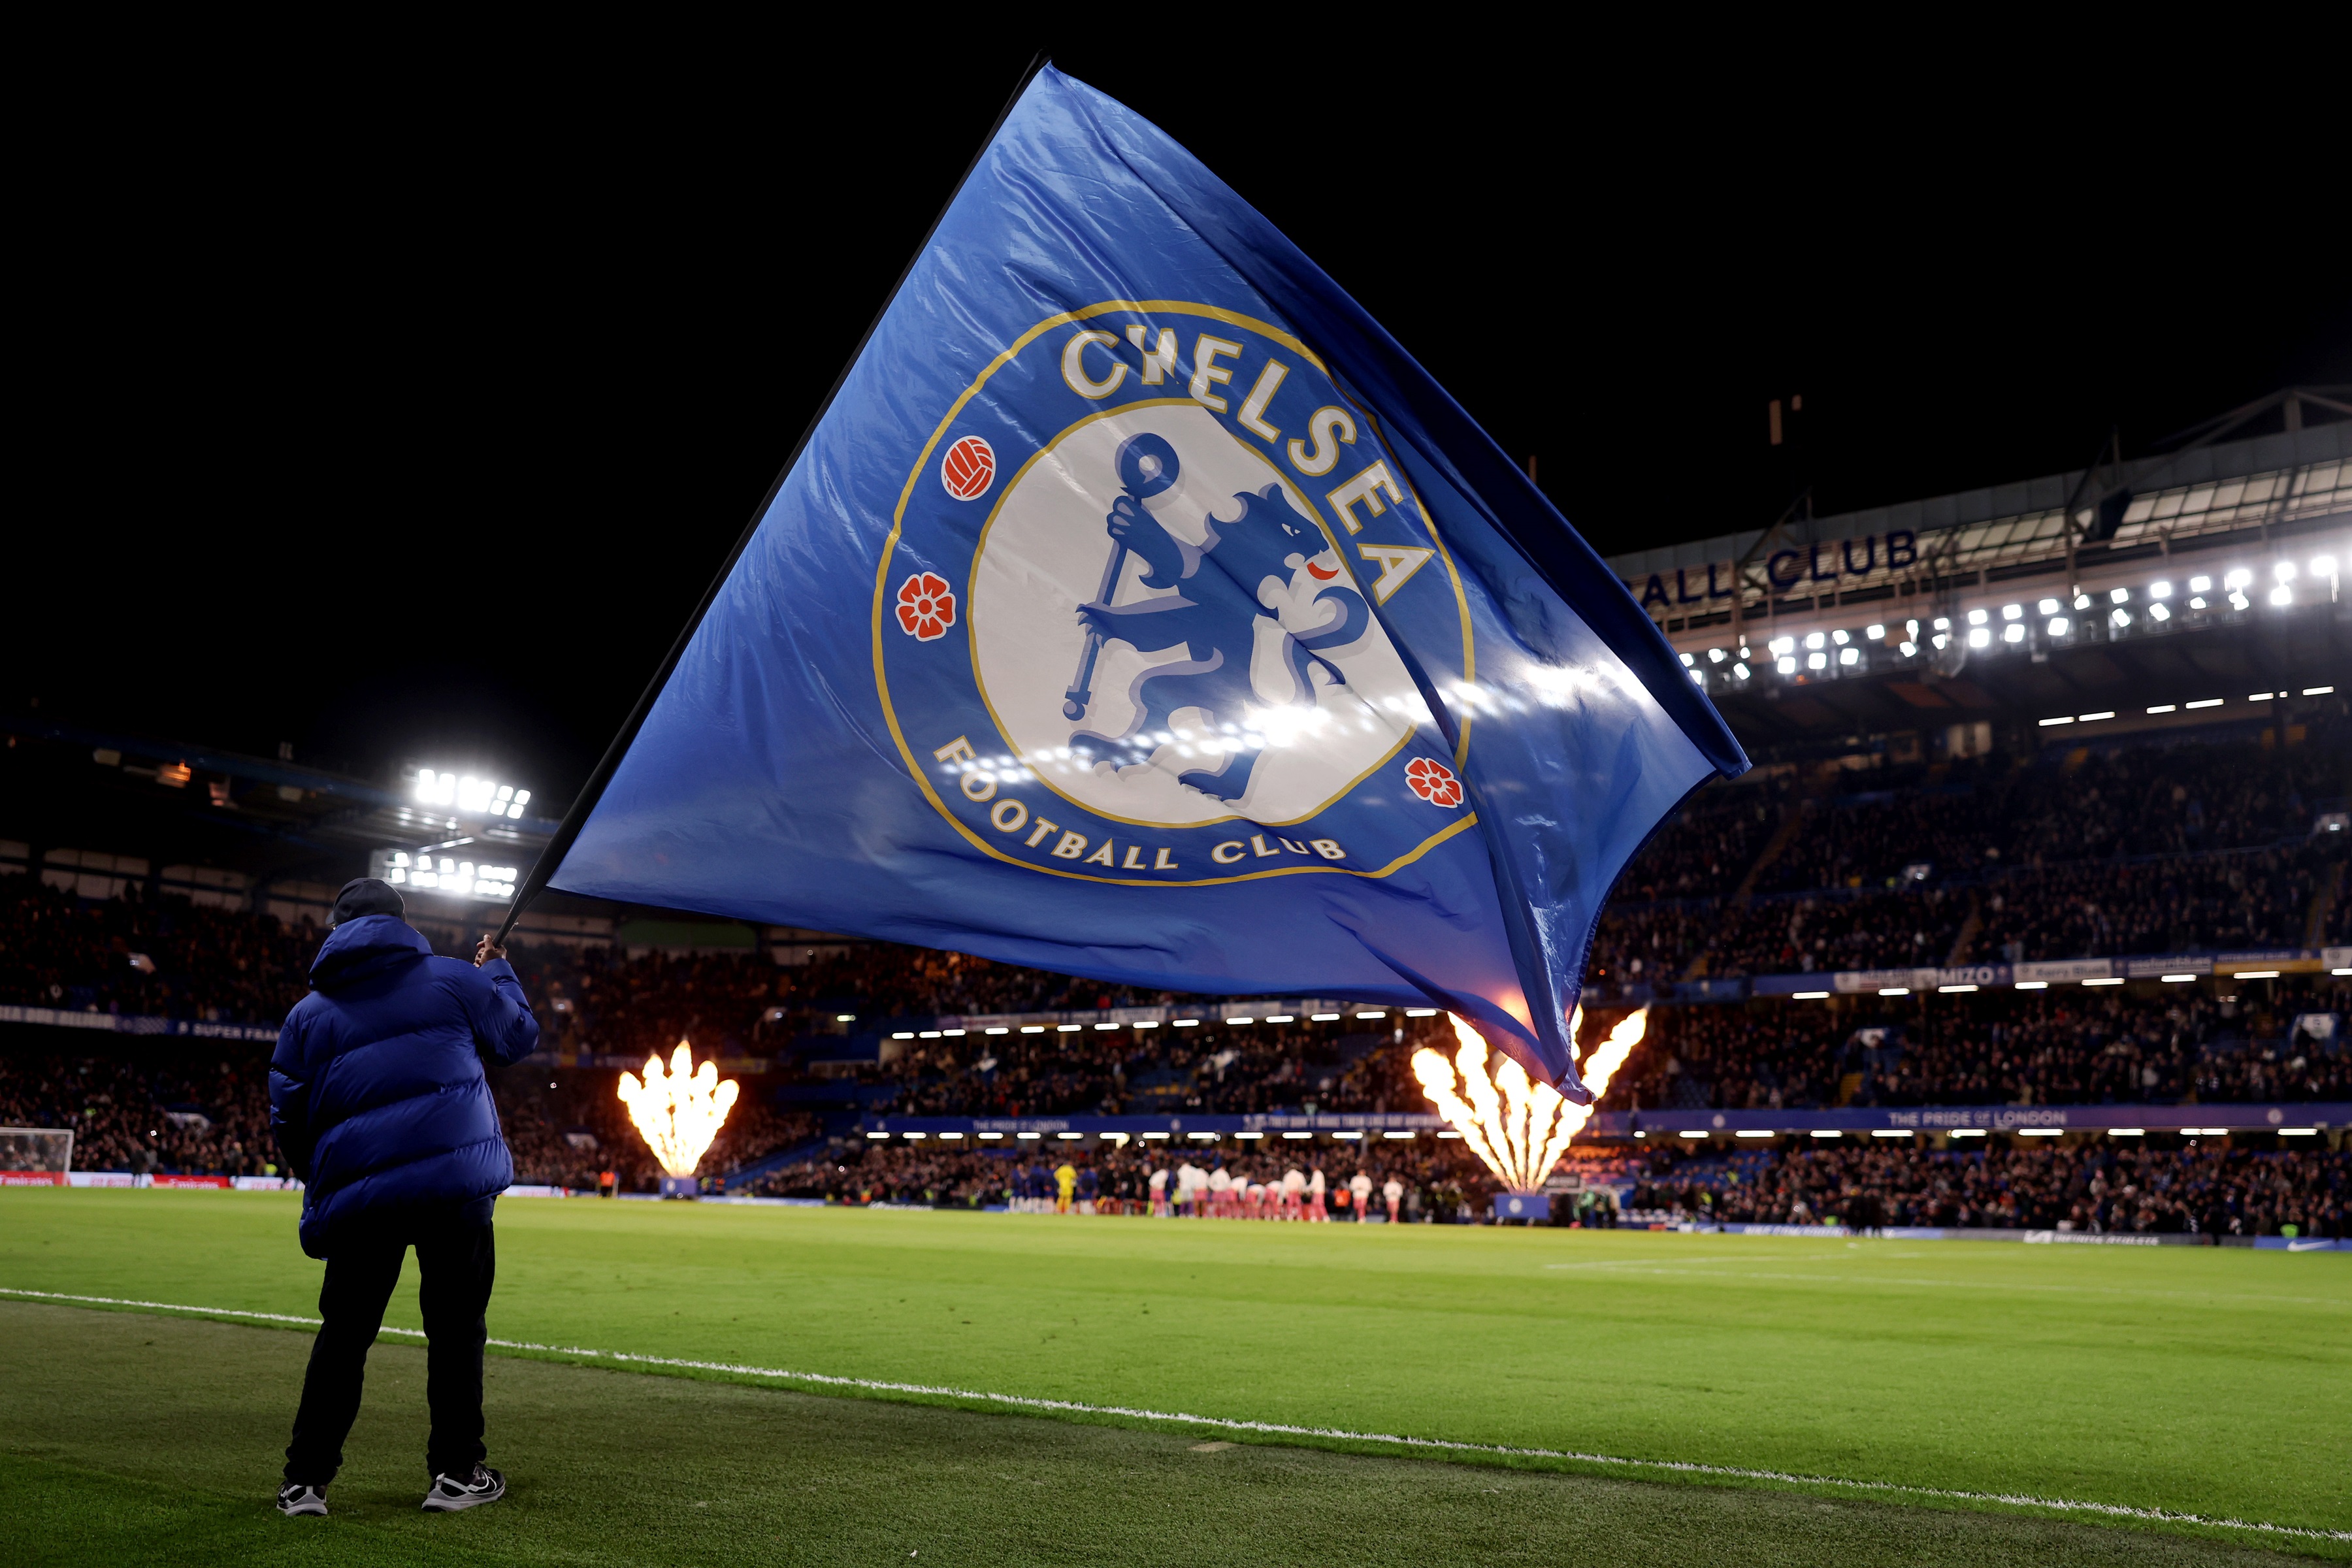 “Playing politics” – Reason for Chelsea’s abstention on key EPL vote revealed